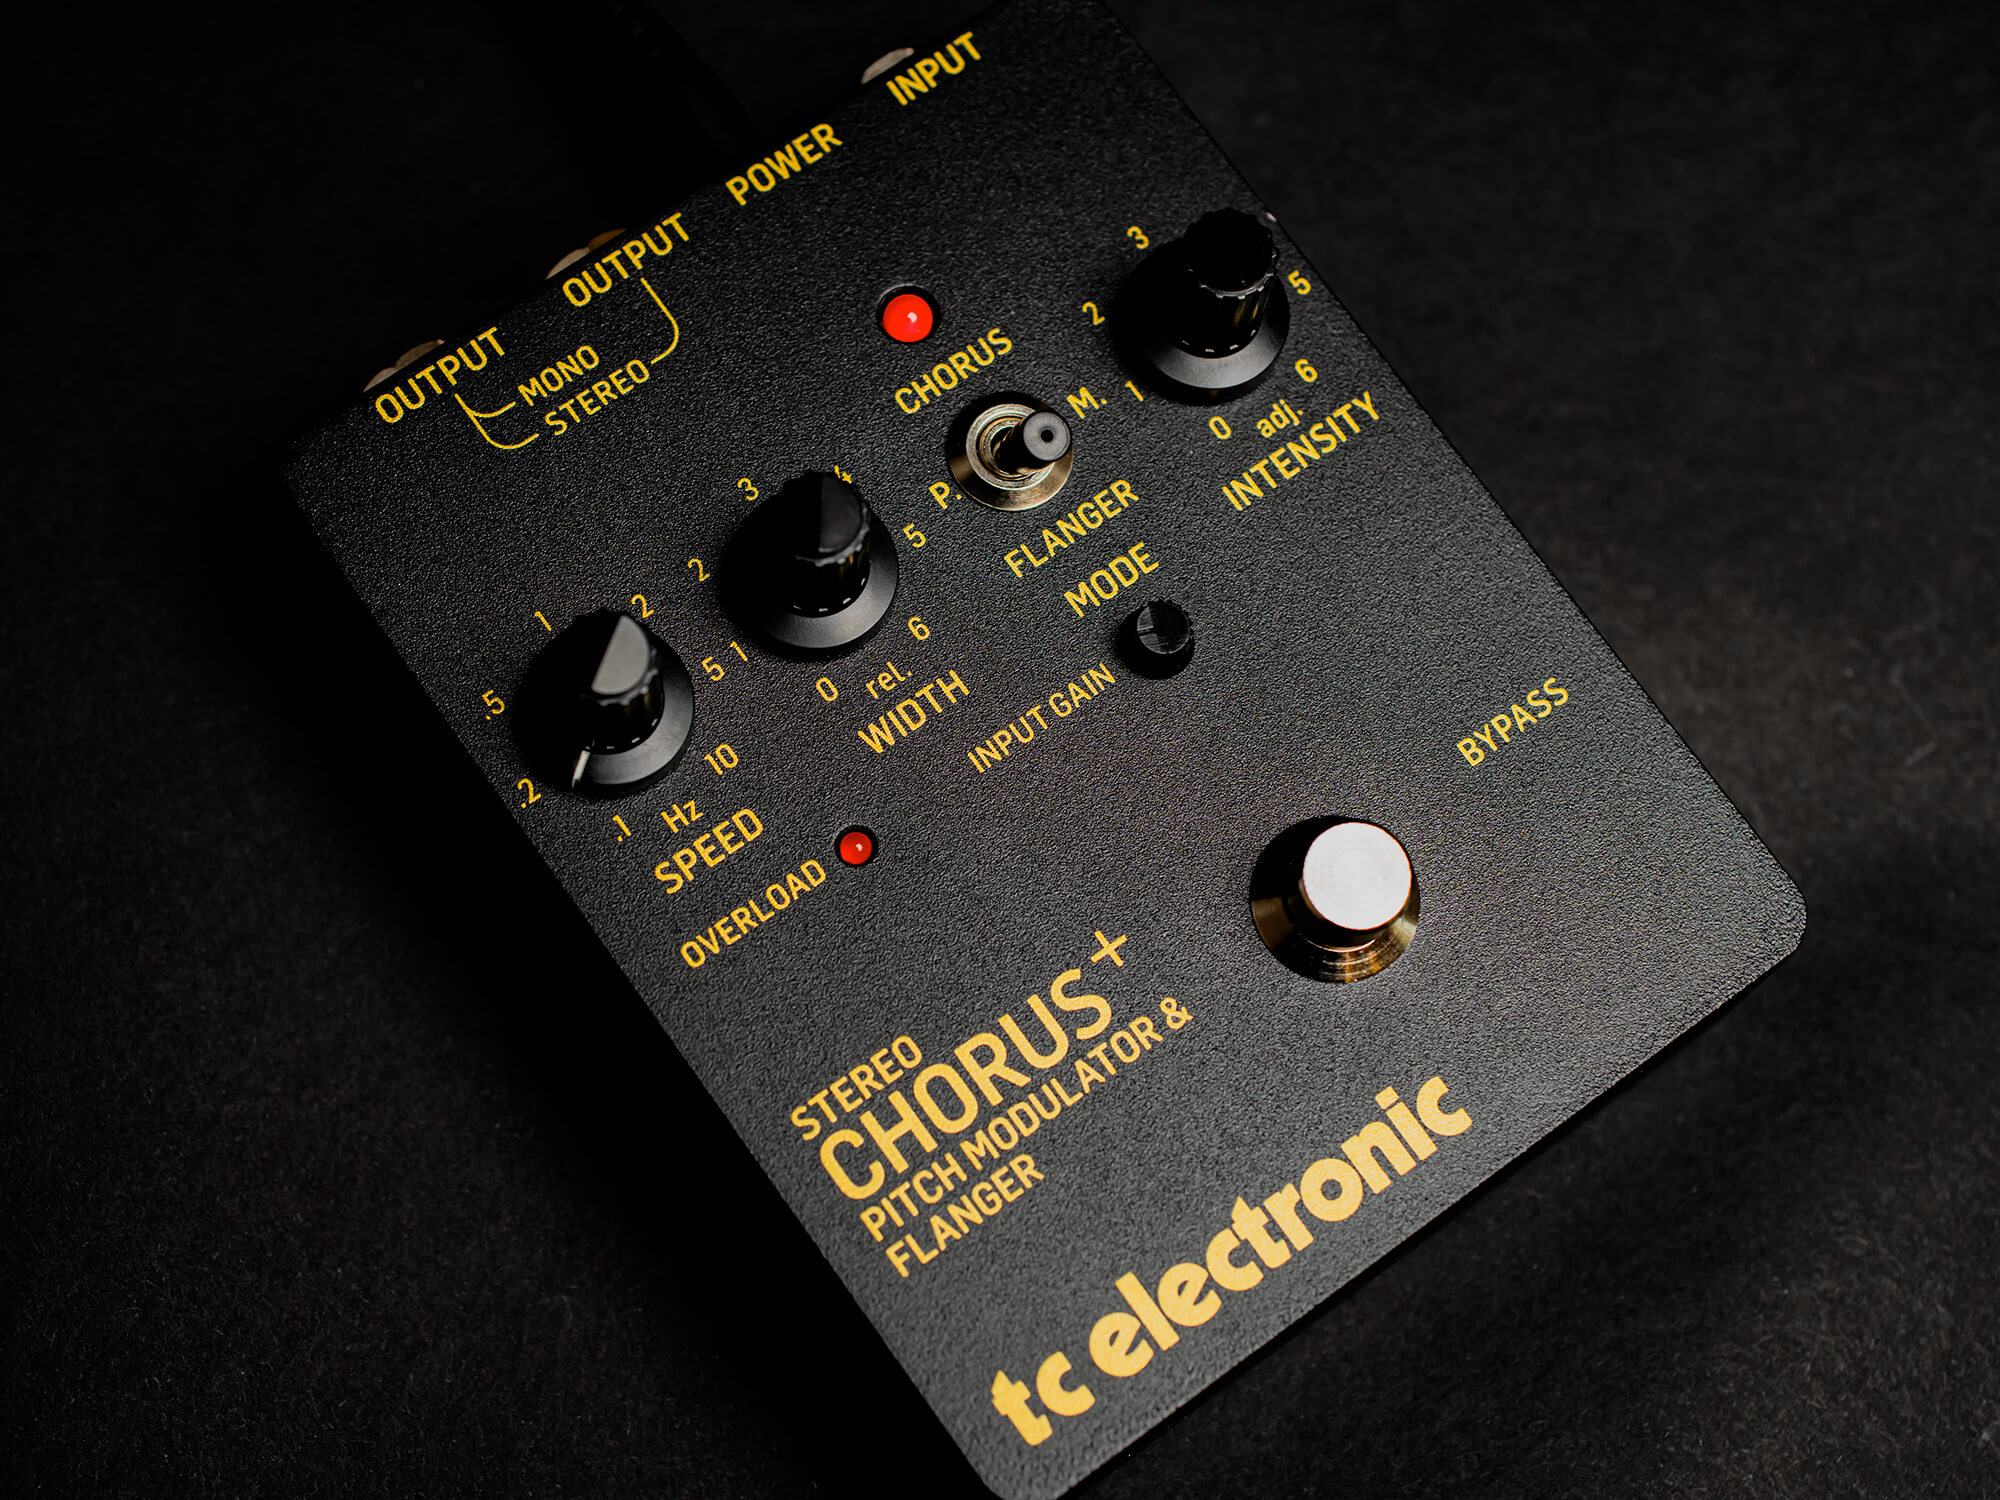 TC Electronic reissues its first pedal, the Stereo Chorus Flanger